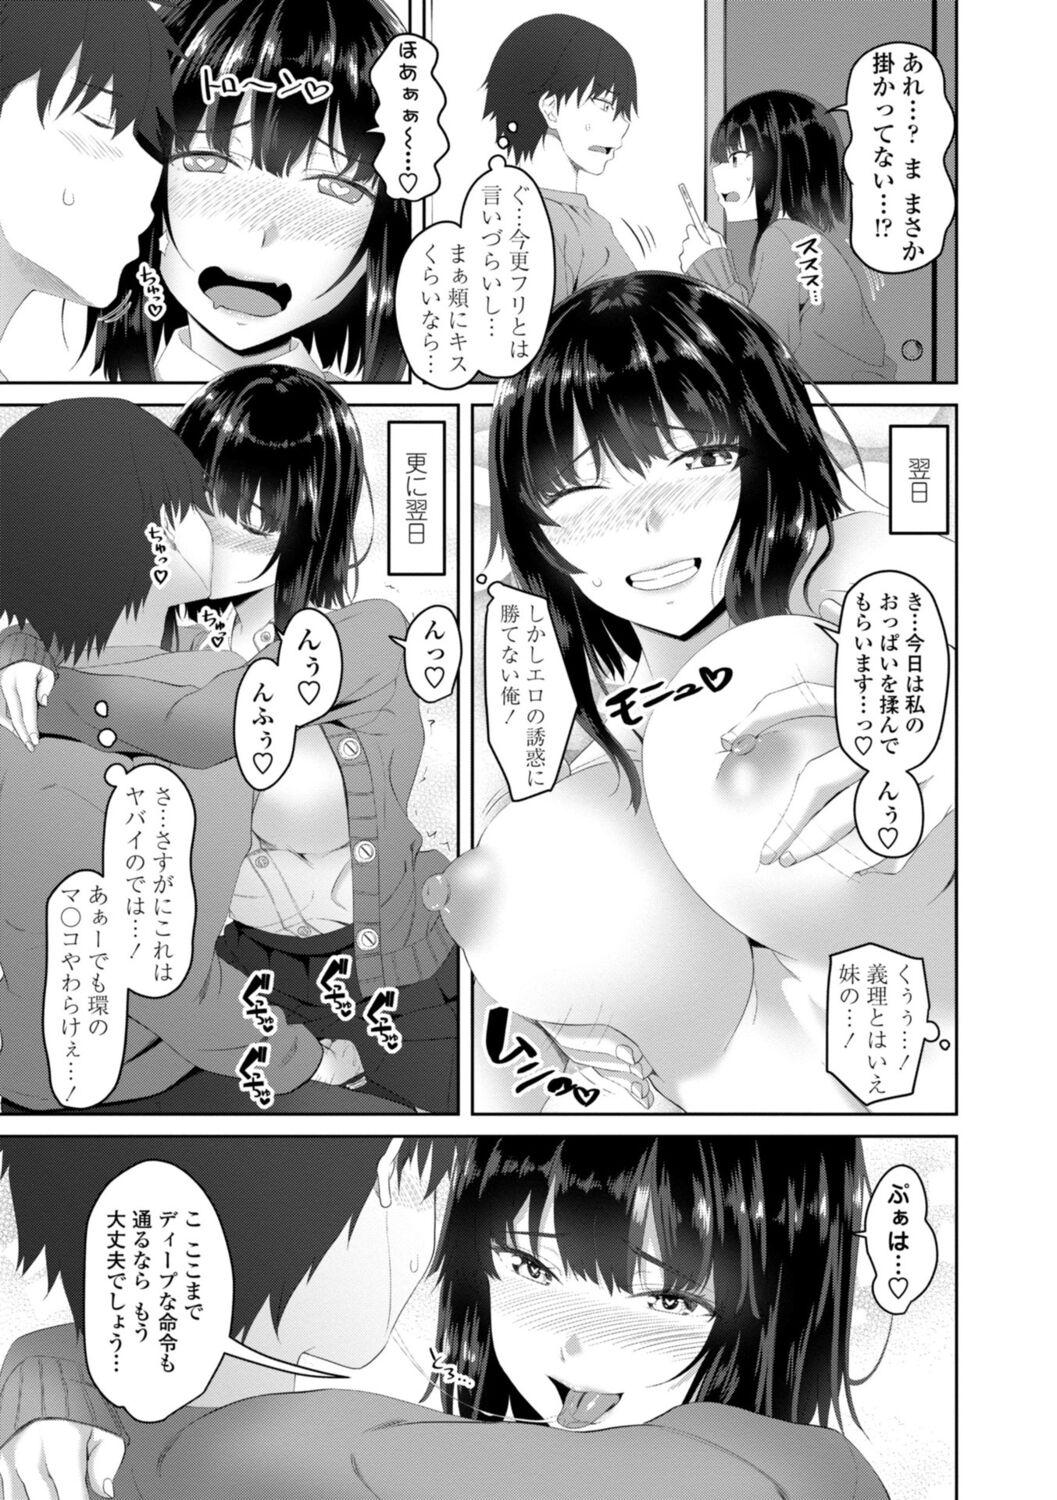 Hot Naked Women [Arsenal] Onii-chan no H na Otoshikata - How to make your brother like you for sex. [Digital] Fucking Hard - Page 9